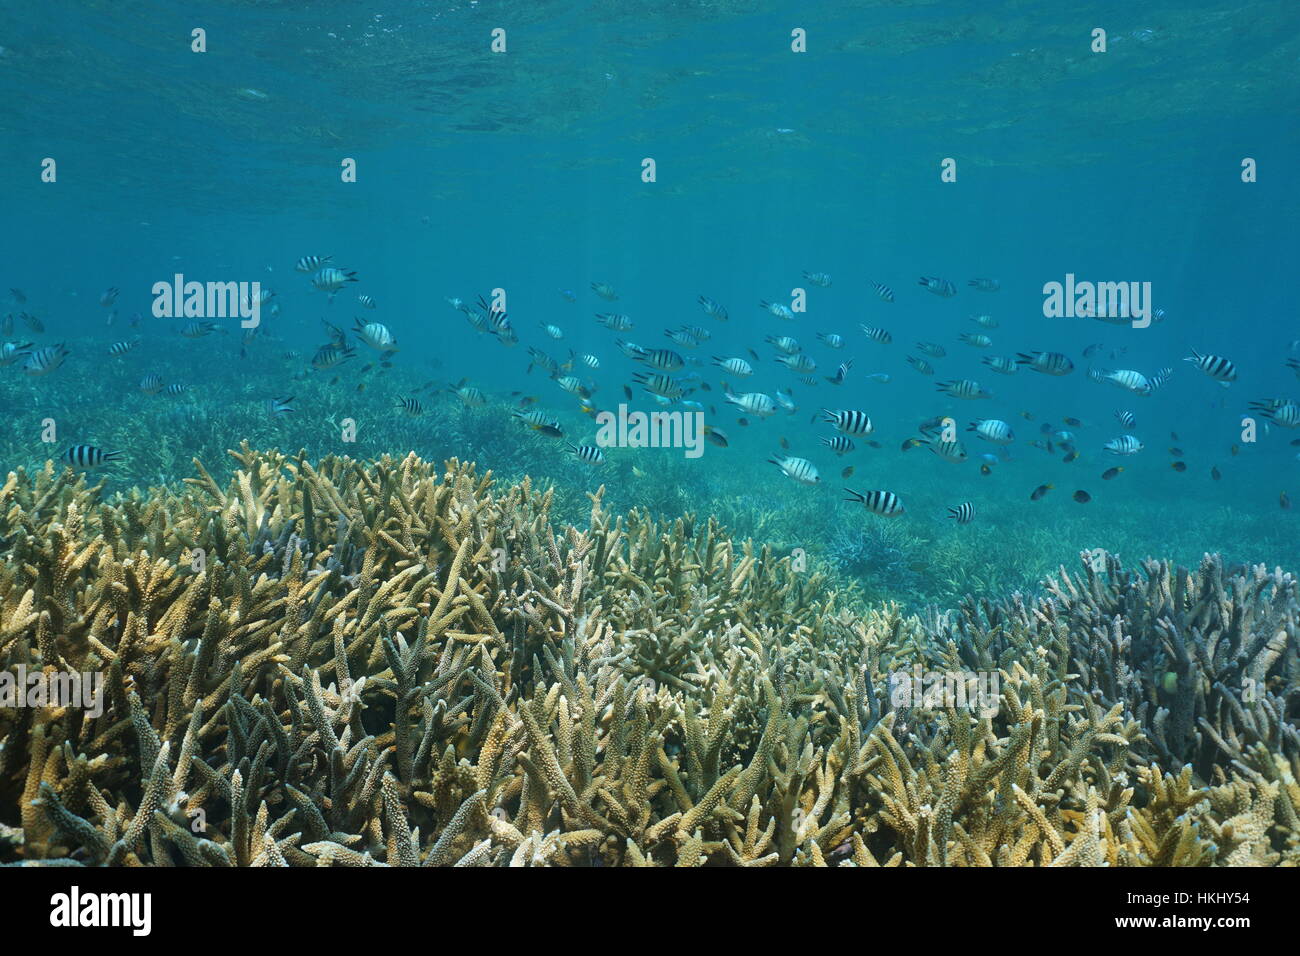 Underwater coral reef with a school of fish (mostly sergeant damselfish) over staghorn corals, south Pacific ocean, New Caledonia Stock Photo